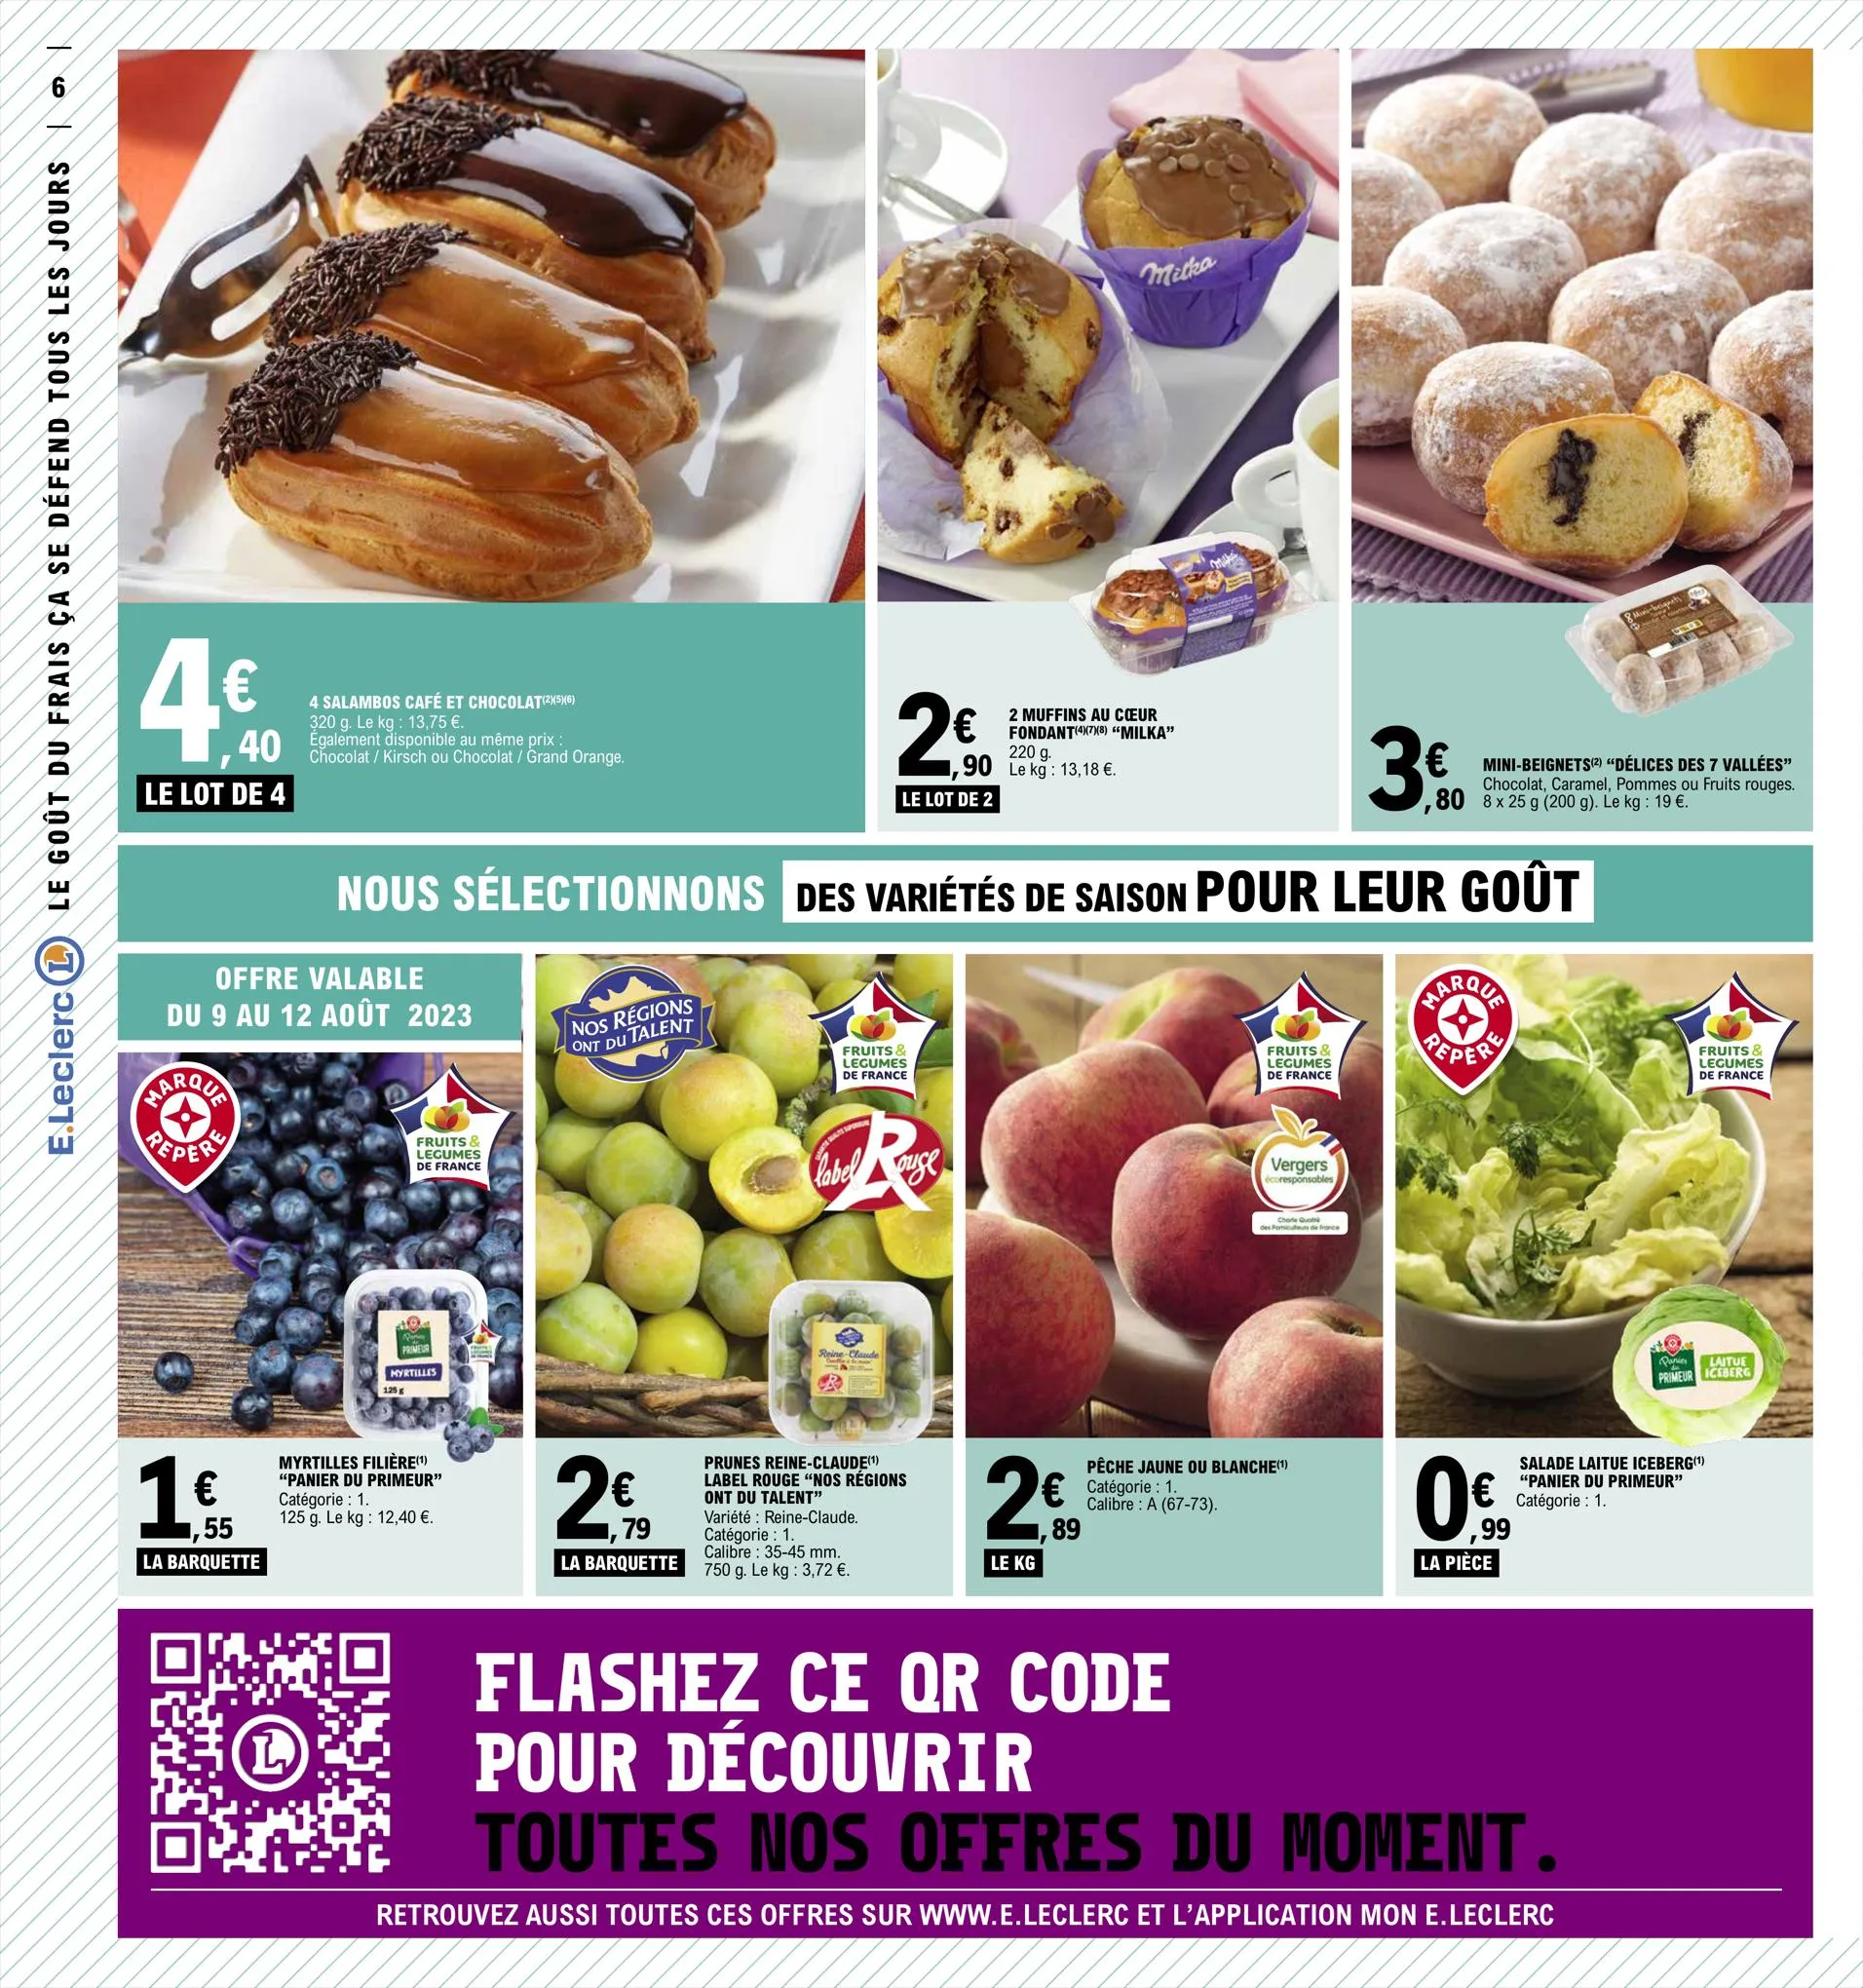 Catalogue Relance Alimentaire 10 - Mixte, page 00006